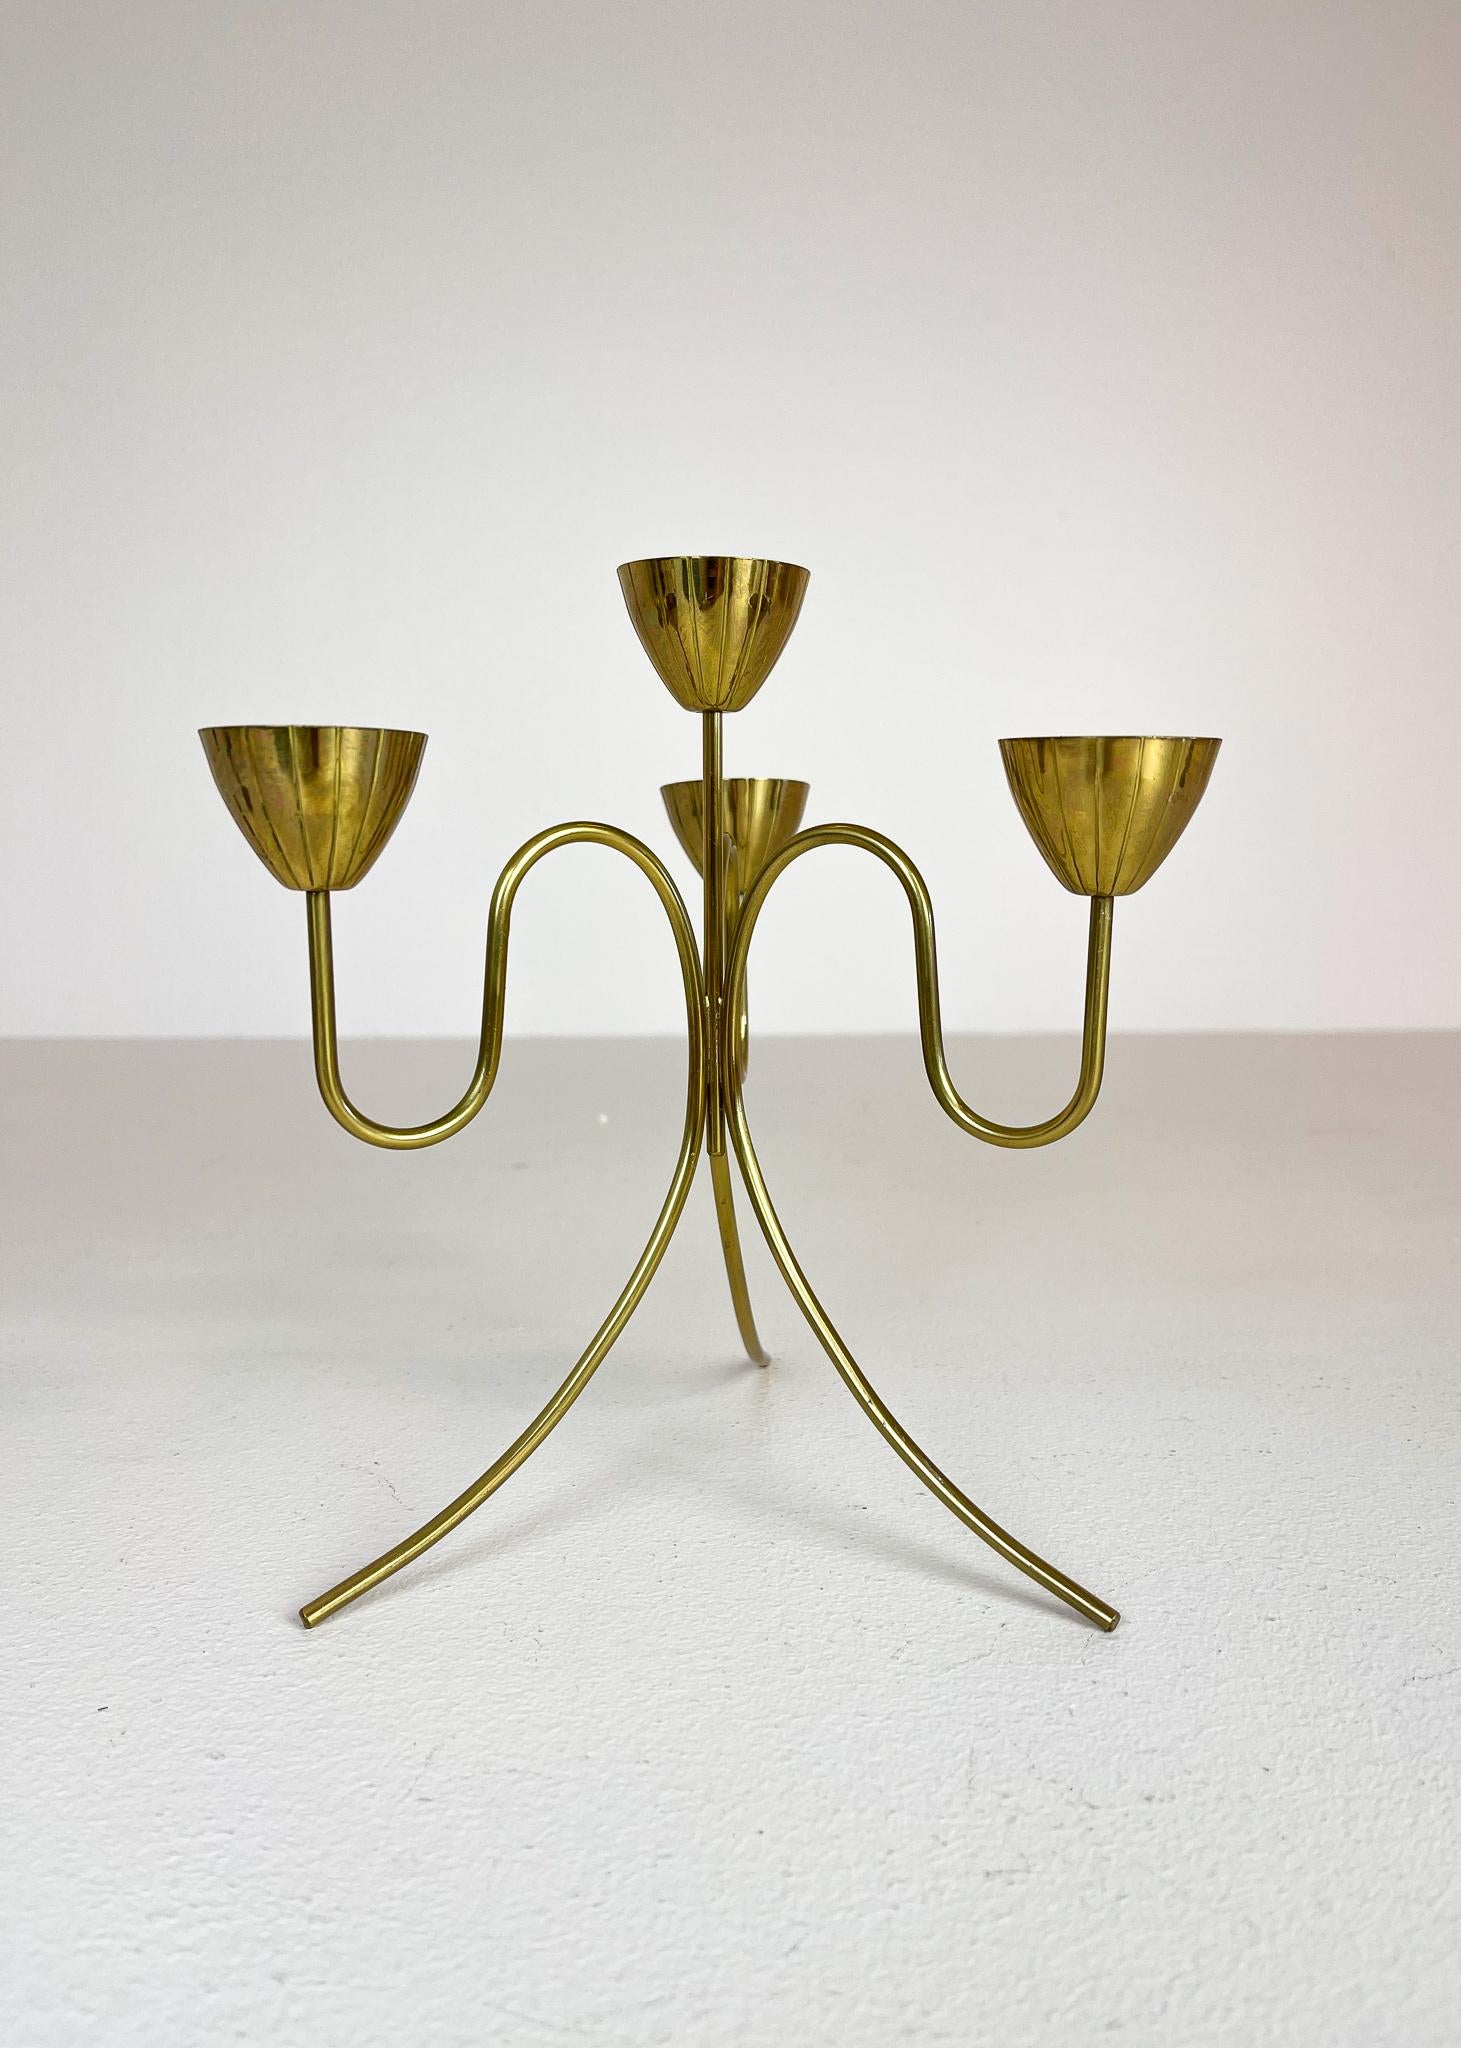 Midcentury Collection of Candle Holders Brass Ystad Metall, Sweden 2